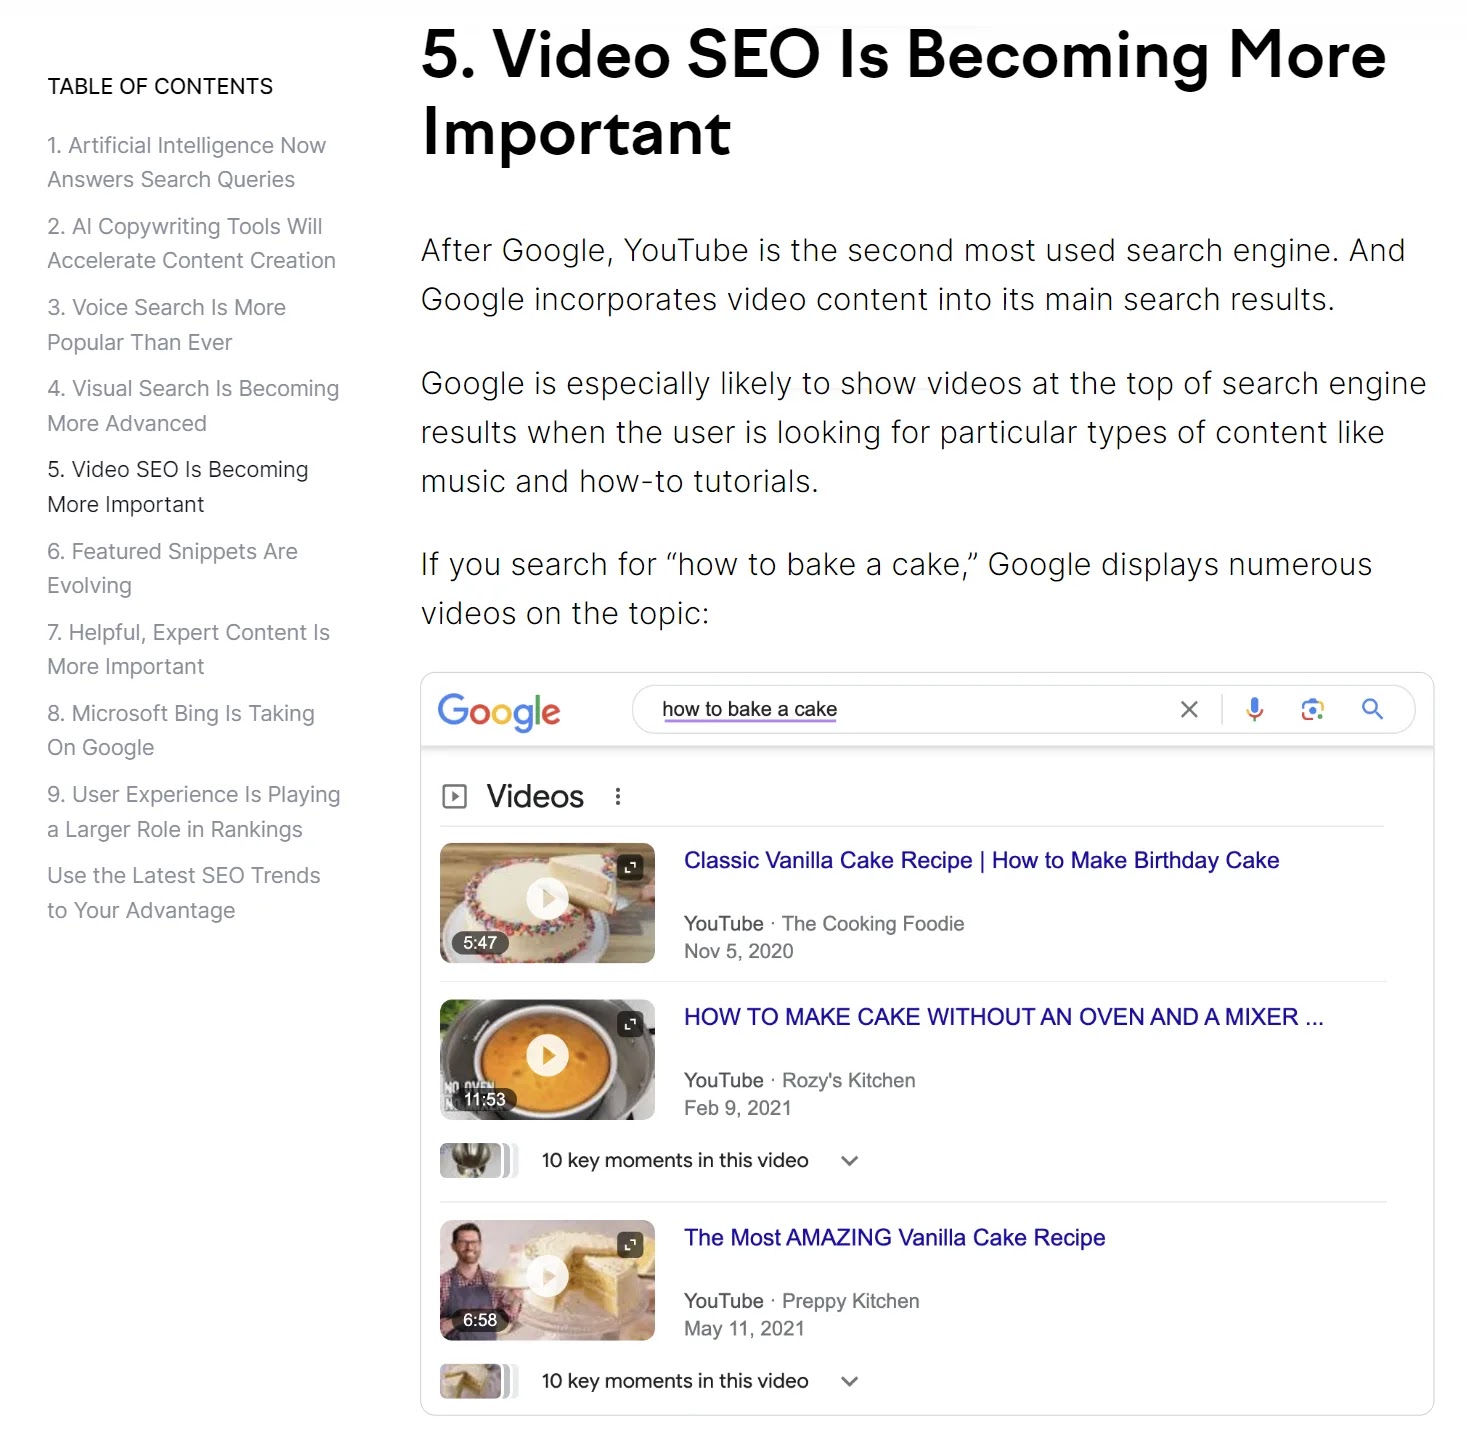 "Video SEO is becoming more important" section of Semrush's article on search engine optimization (SEO) trends